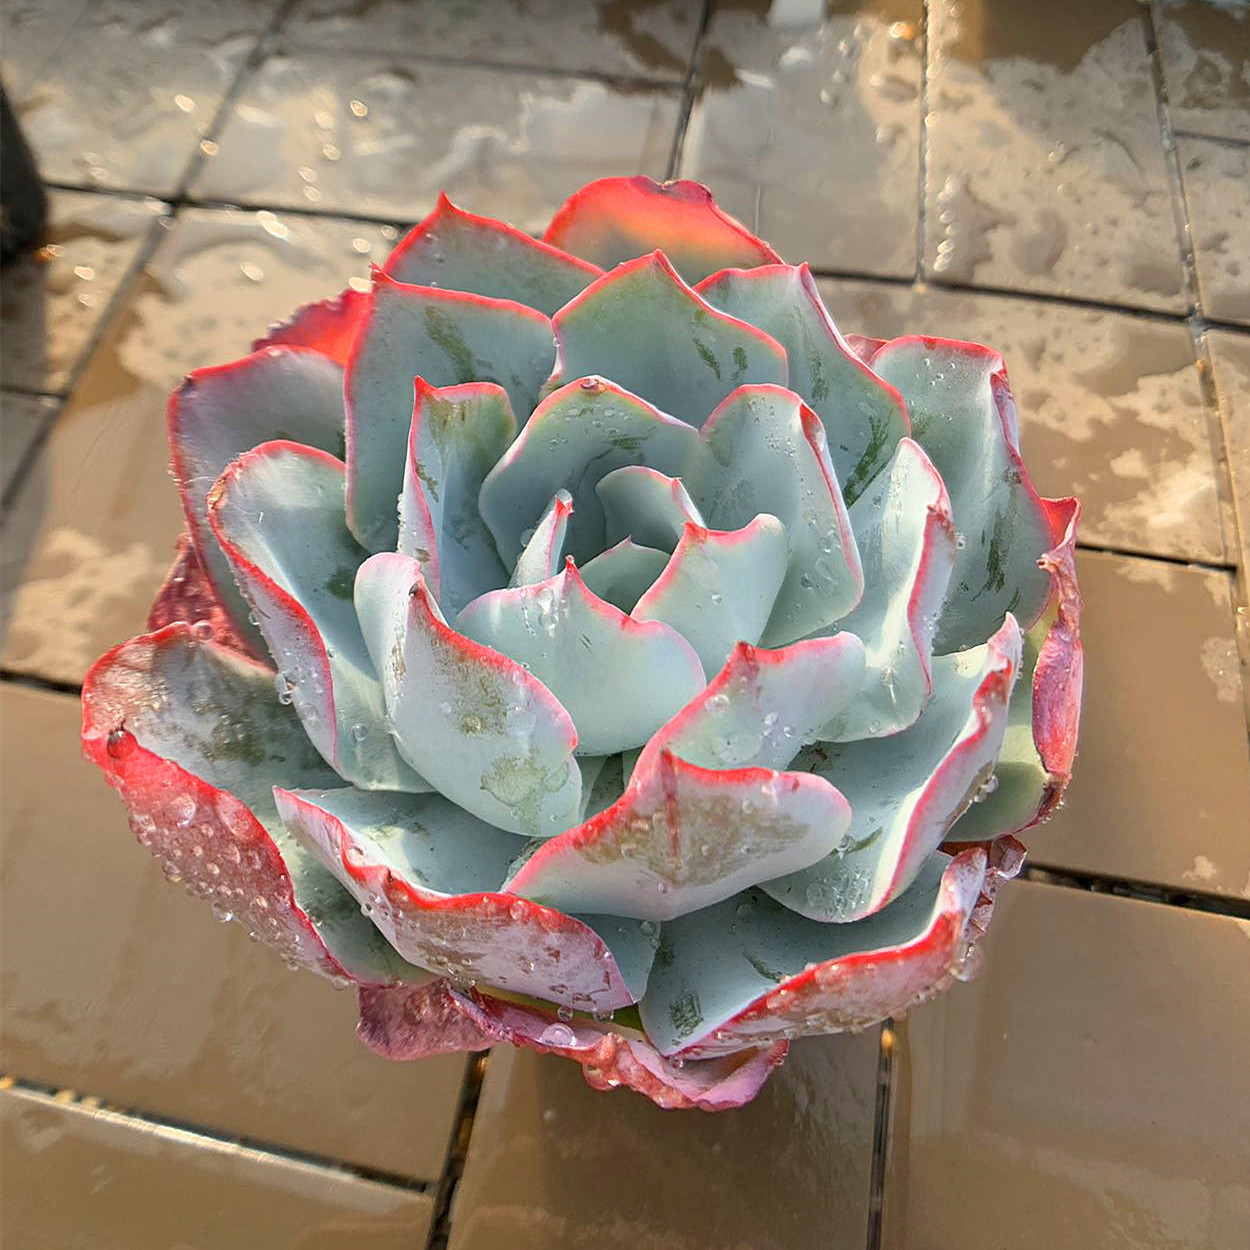  agriculture . direct sale succulent plant ....ekebe rear . blue light ( single ) extra-large beautiful seedling decorative plant interior many meat speciality VERVE